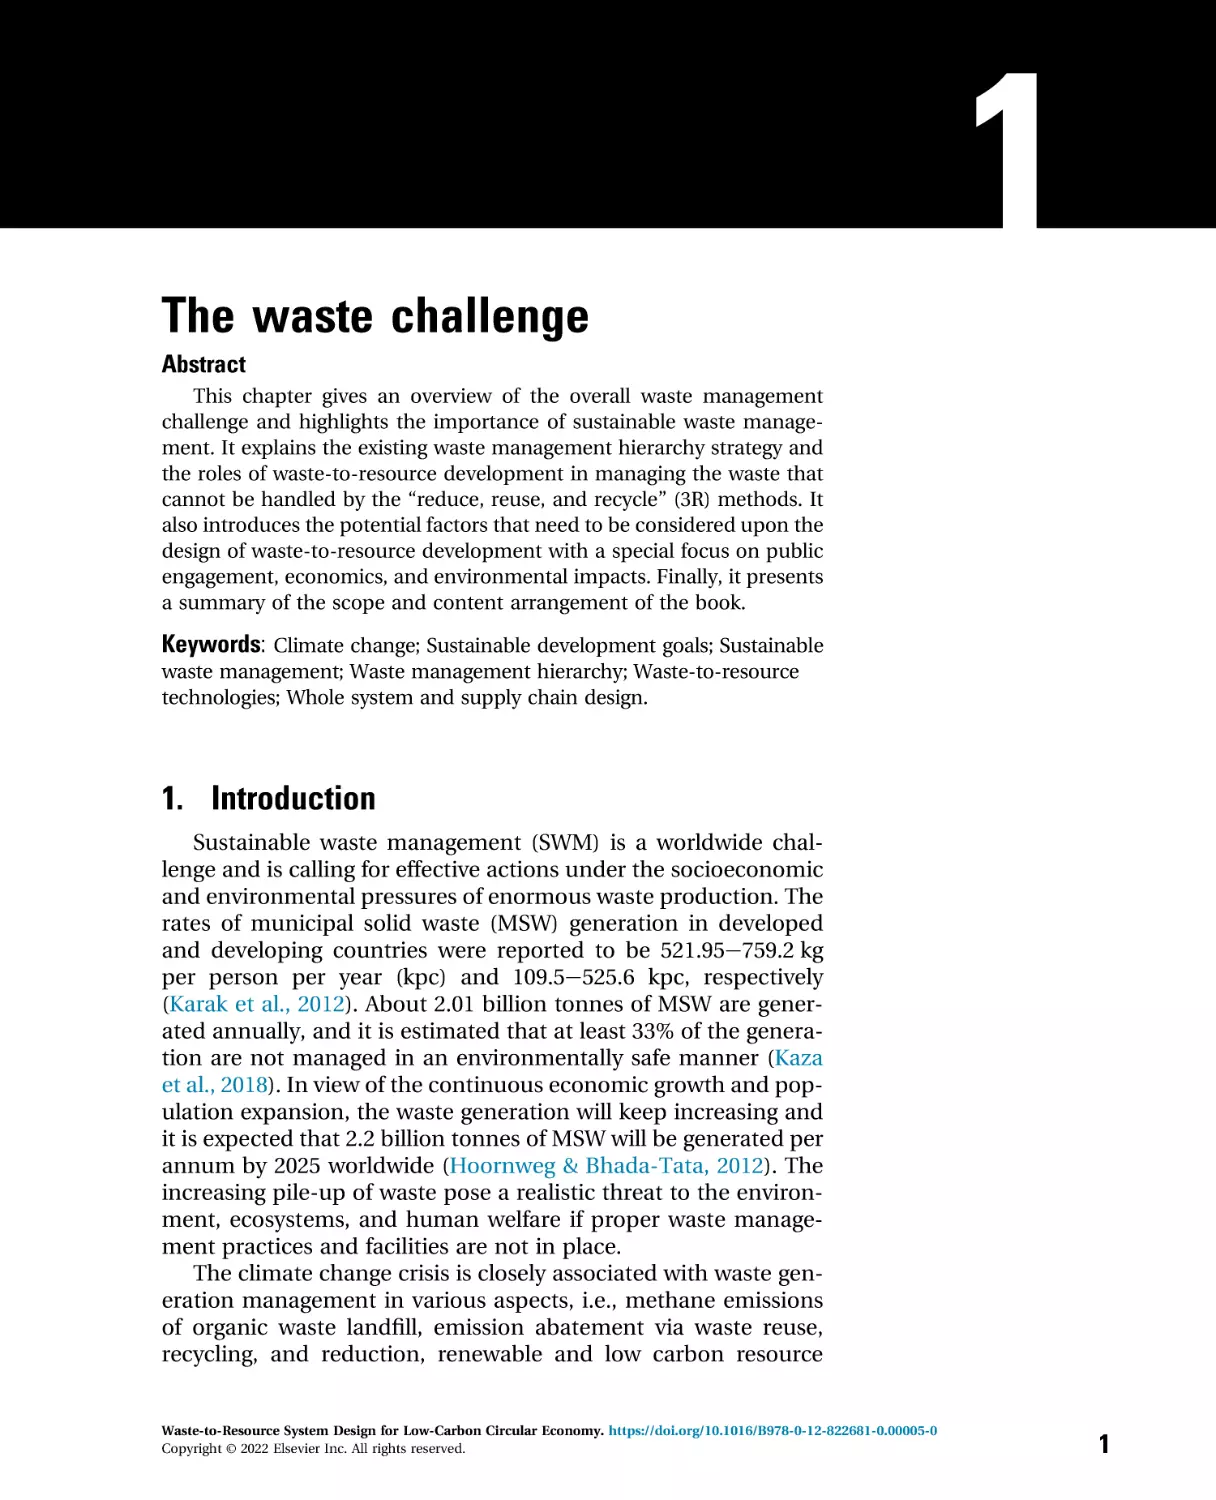 1 - The waste challenge
1. Introduction